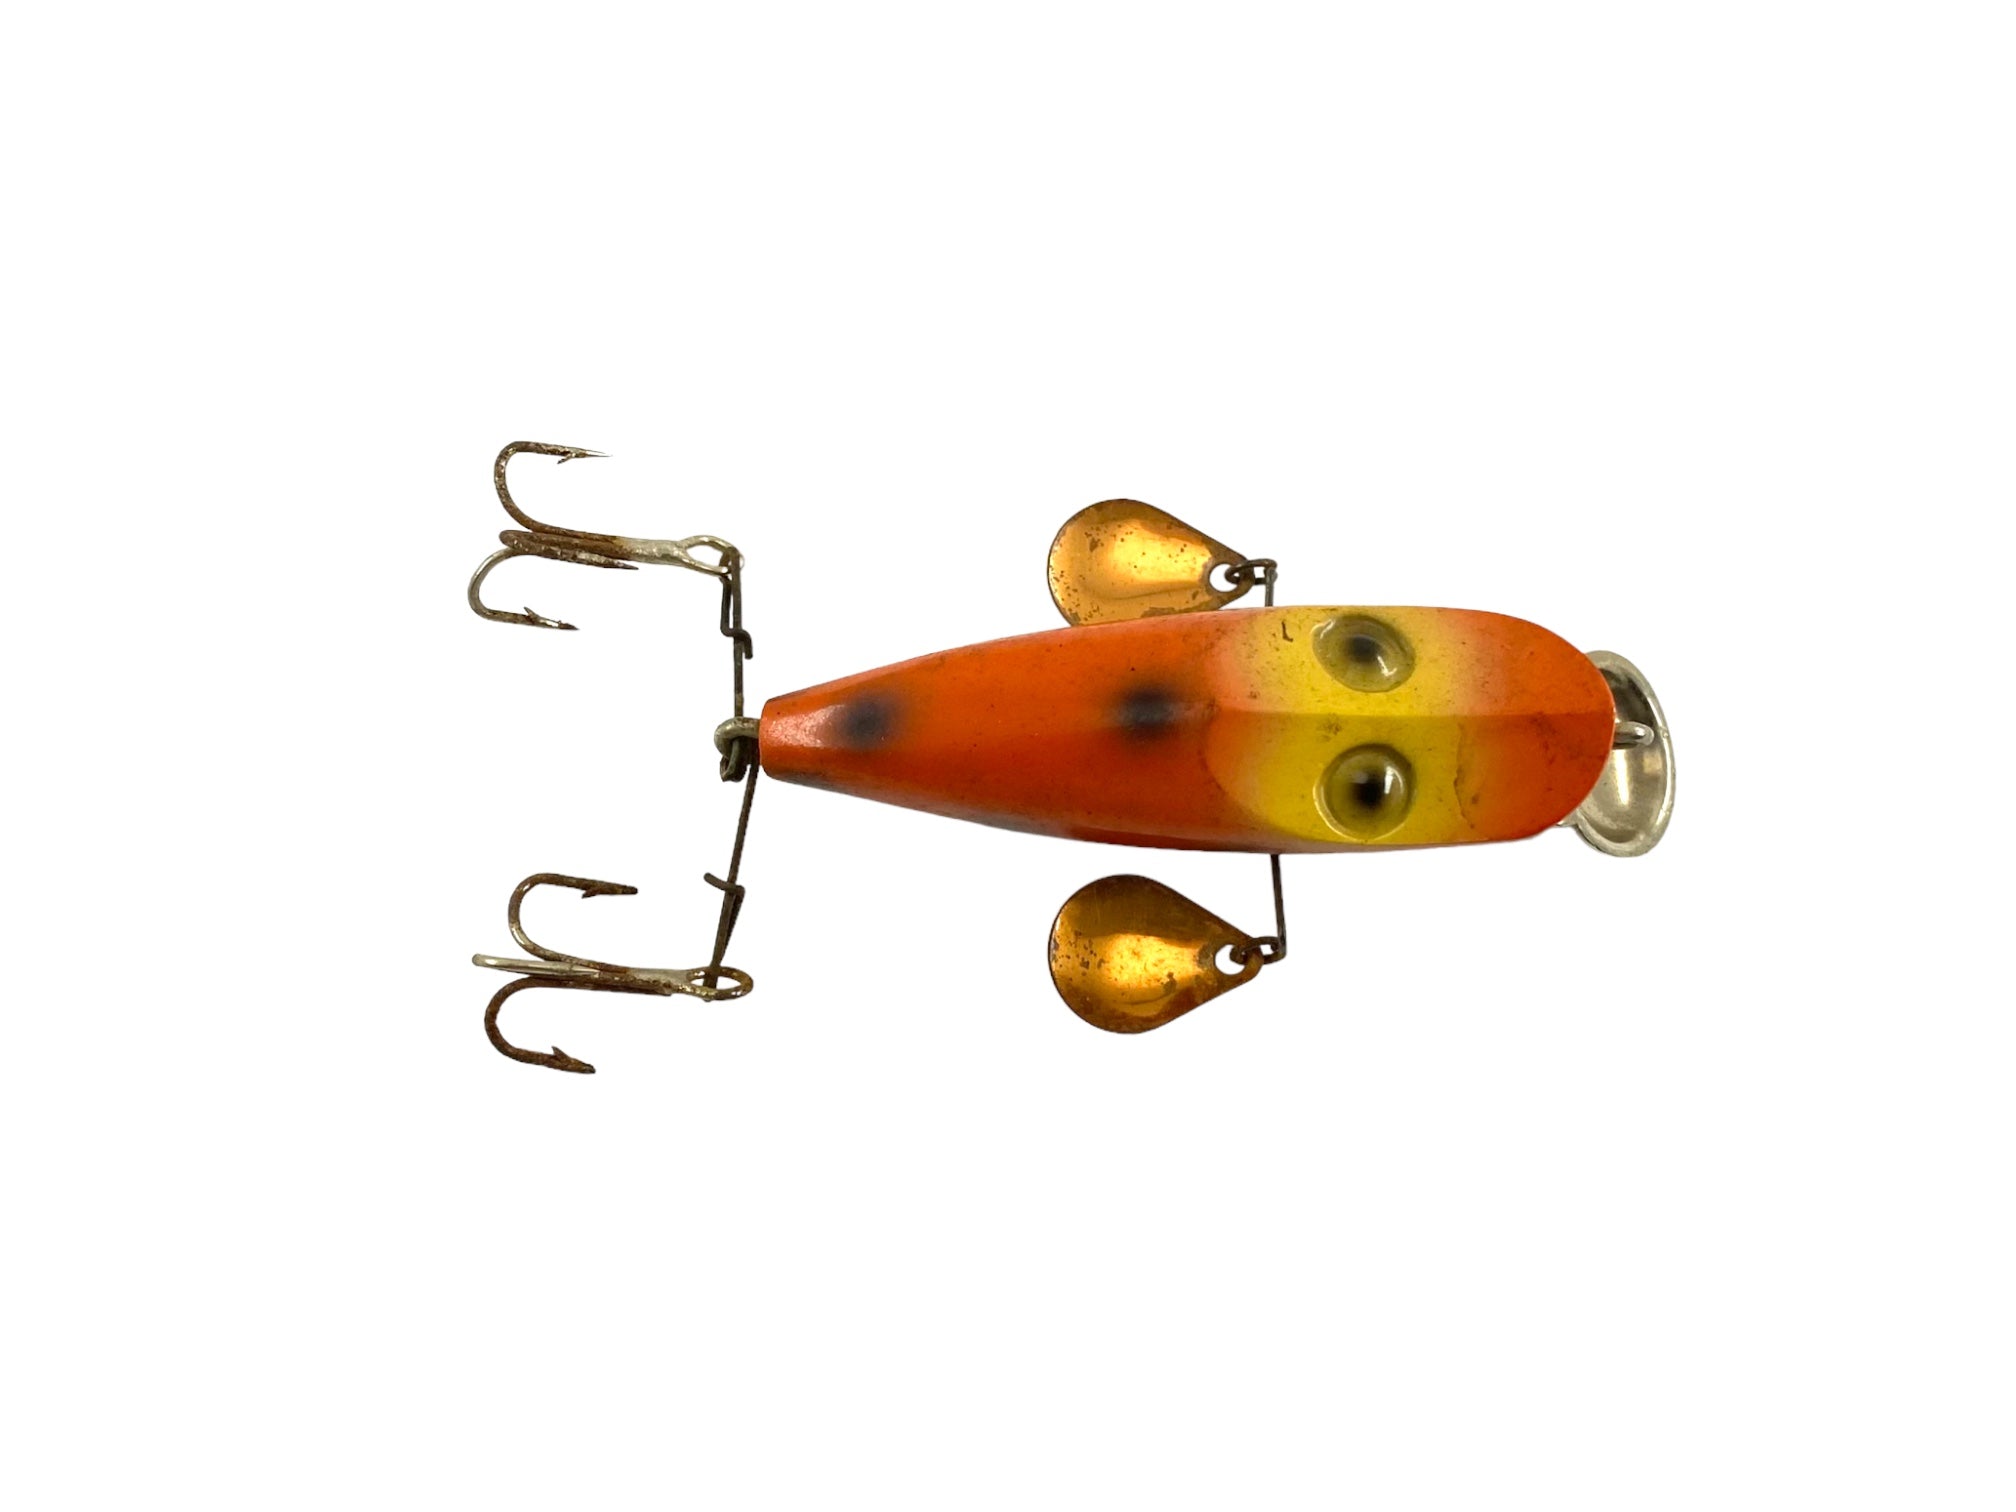 Antique fishing lures, Old fishing lures, Vintage fishing lures